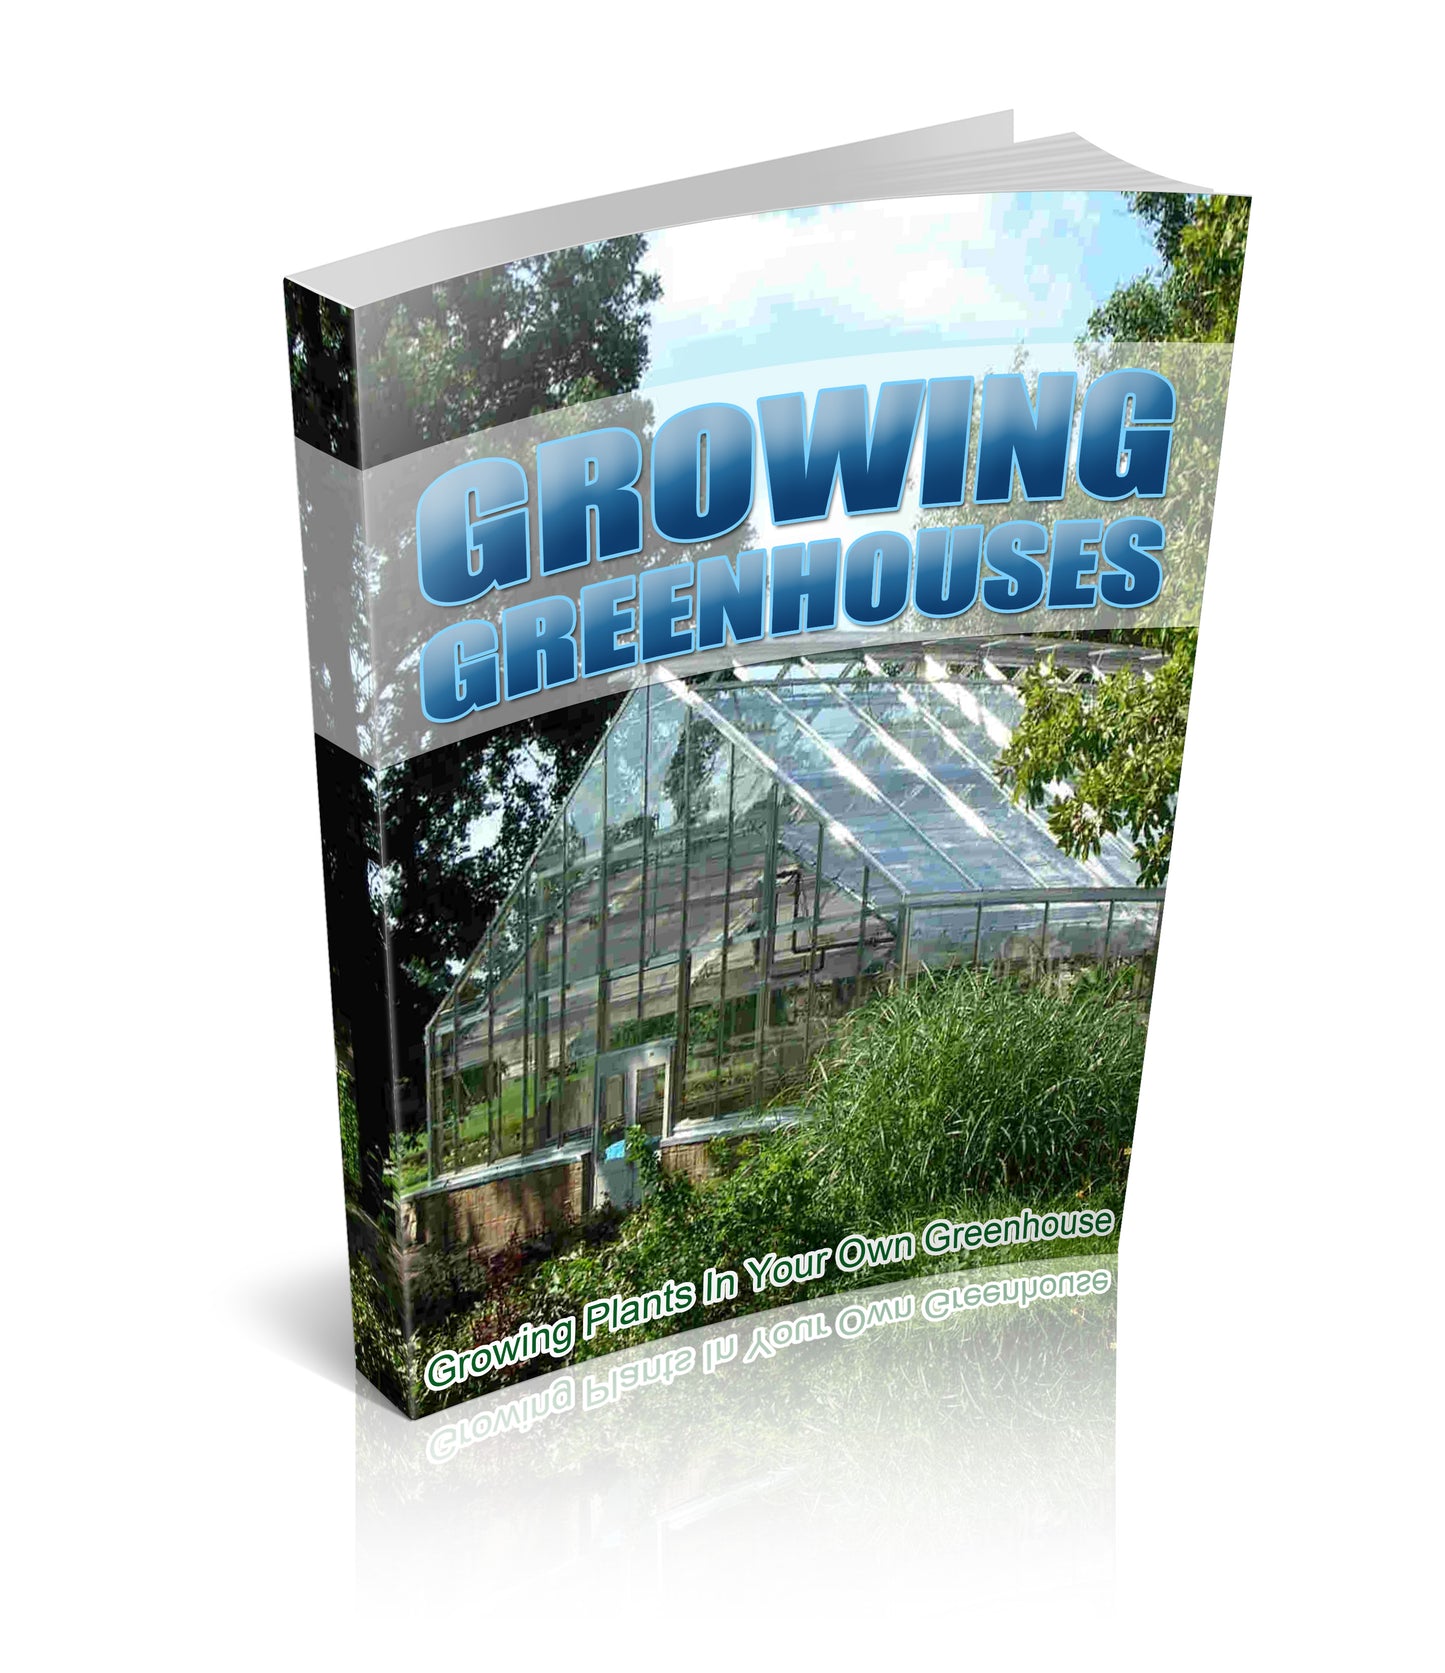 Grow plants in a greenhouse